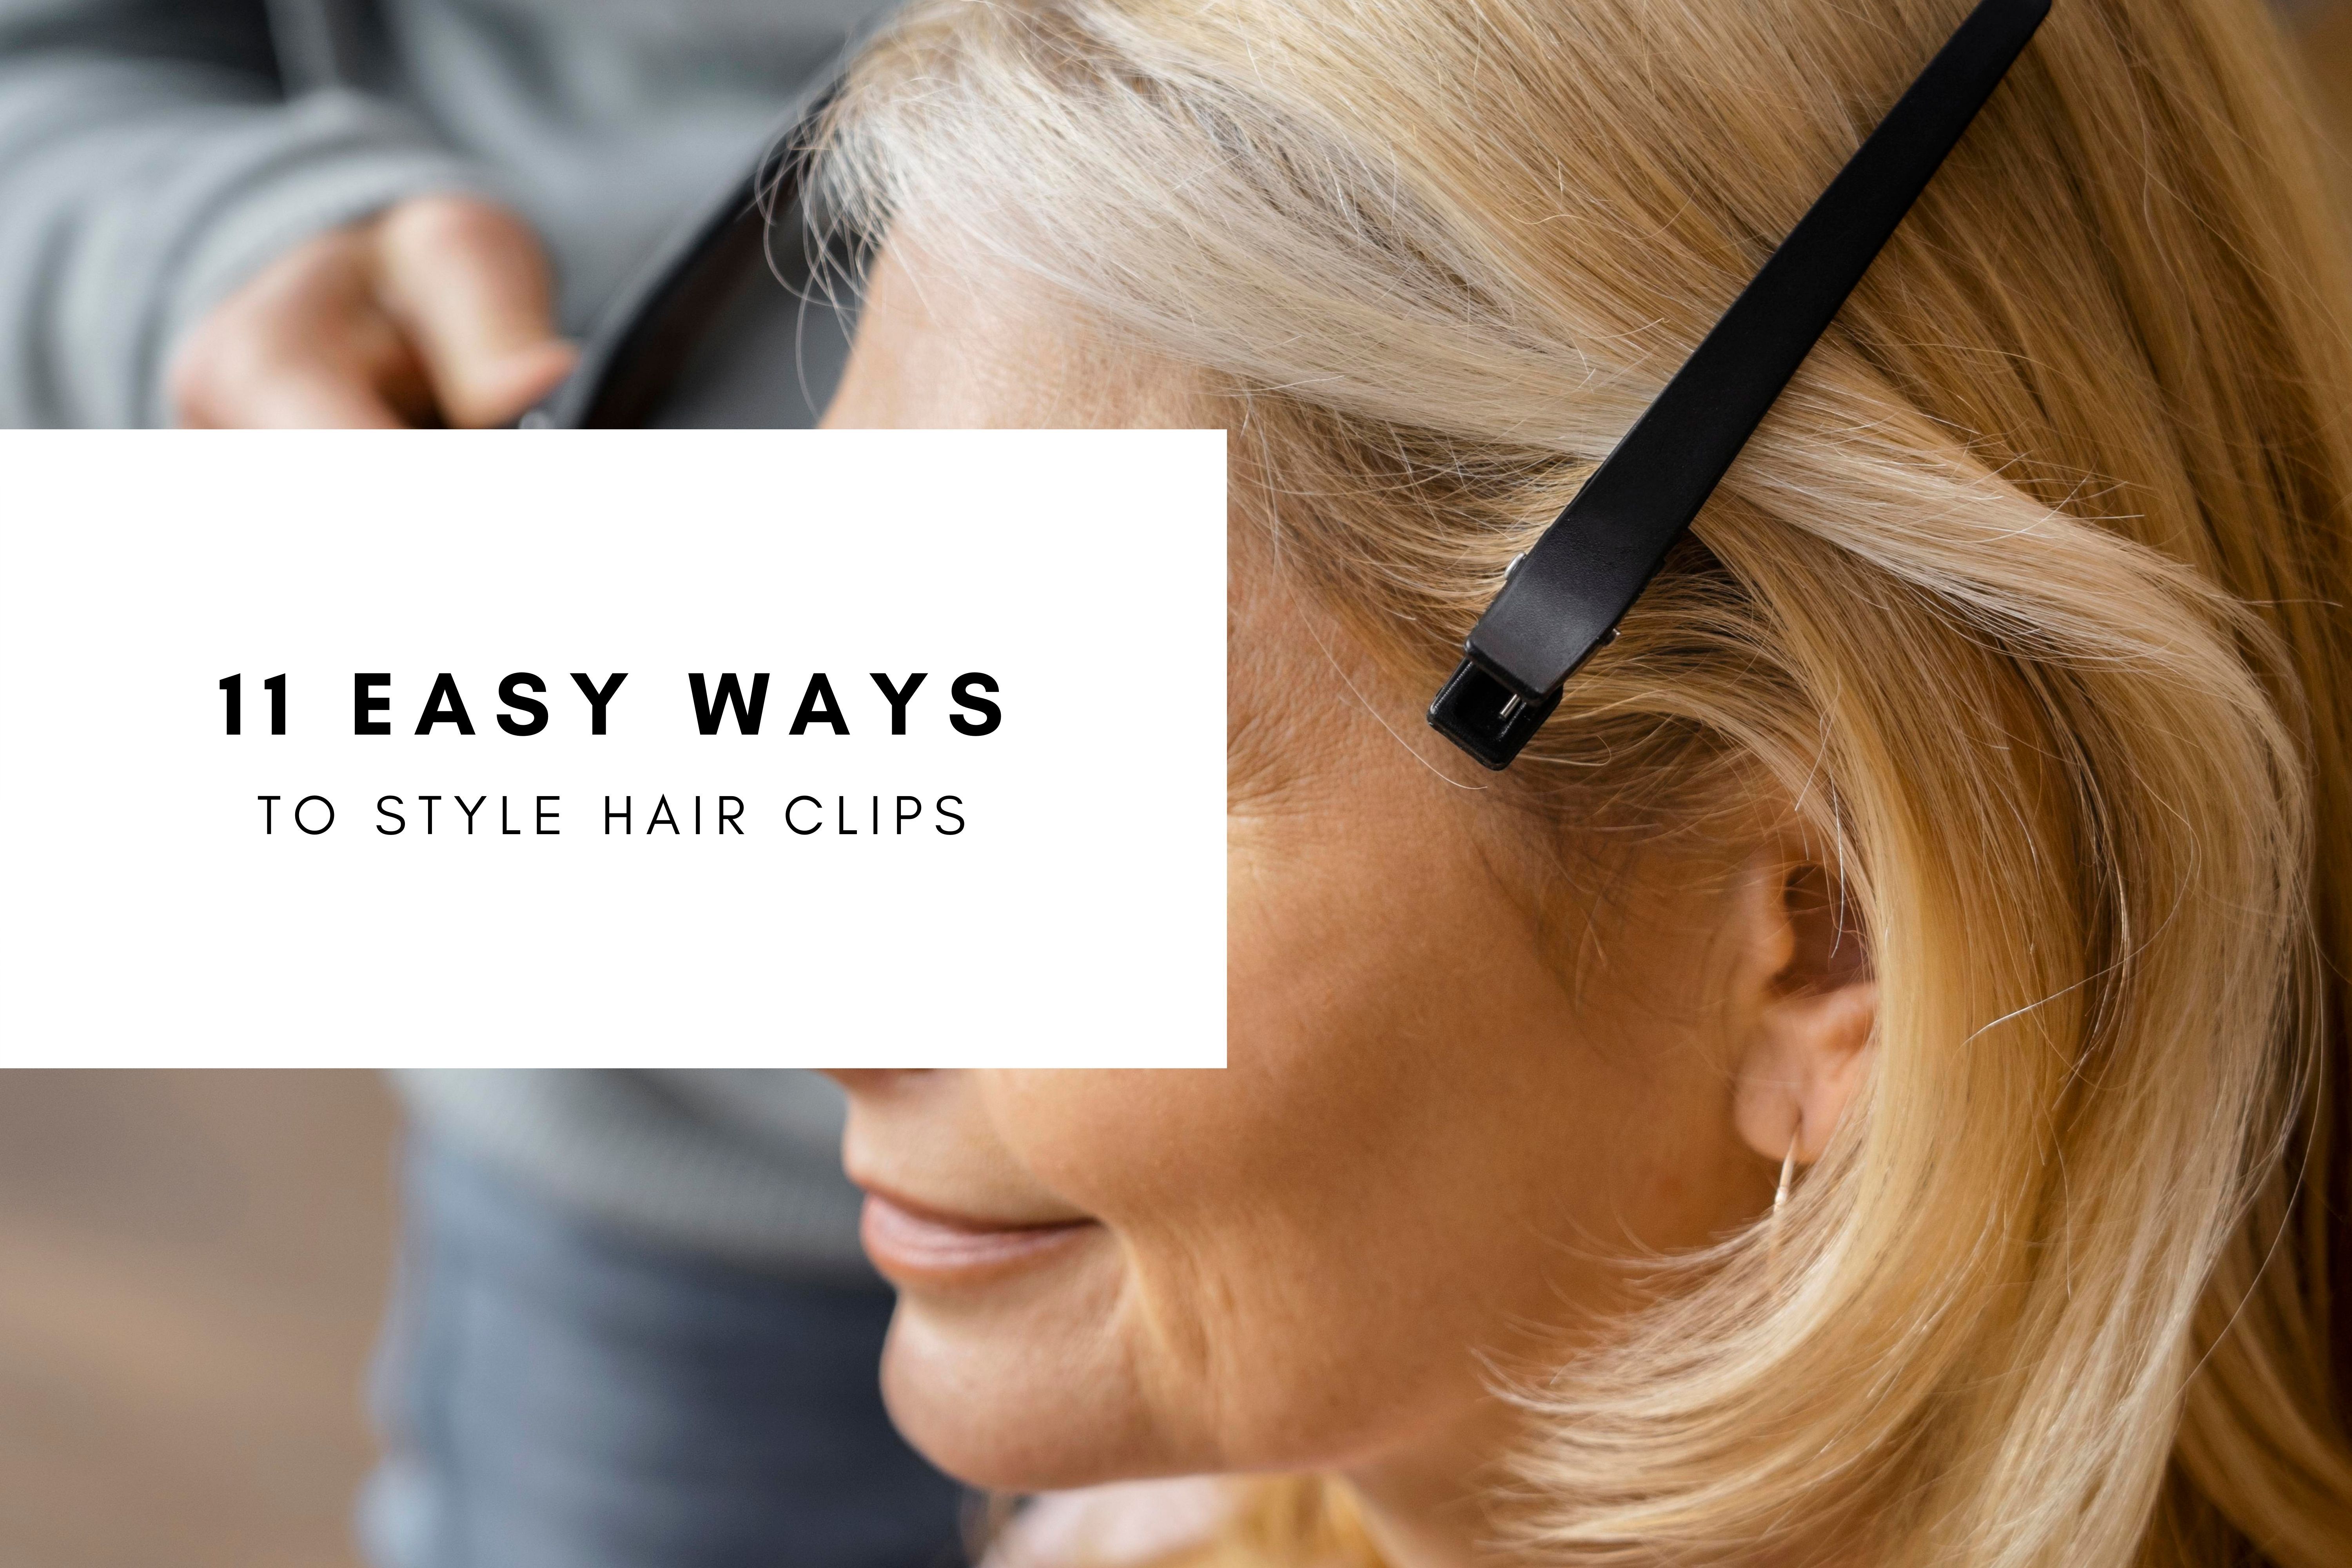 11 Easy Ways to Style Hair Clips for All Types of Hair